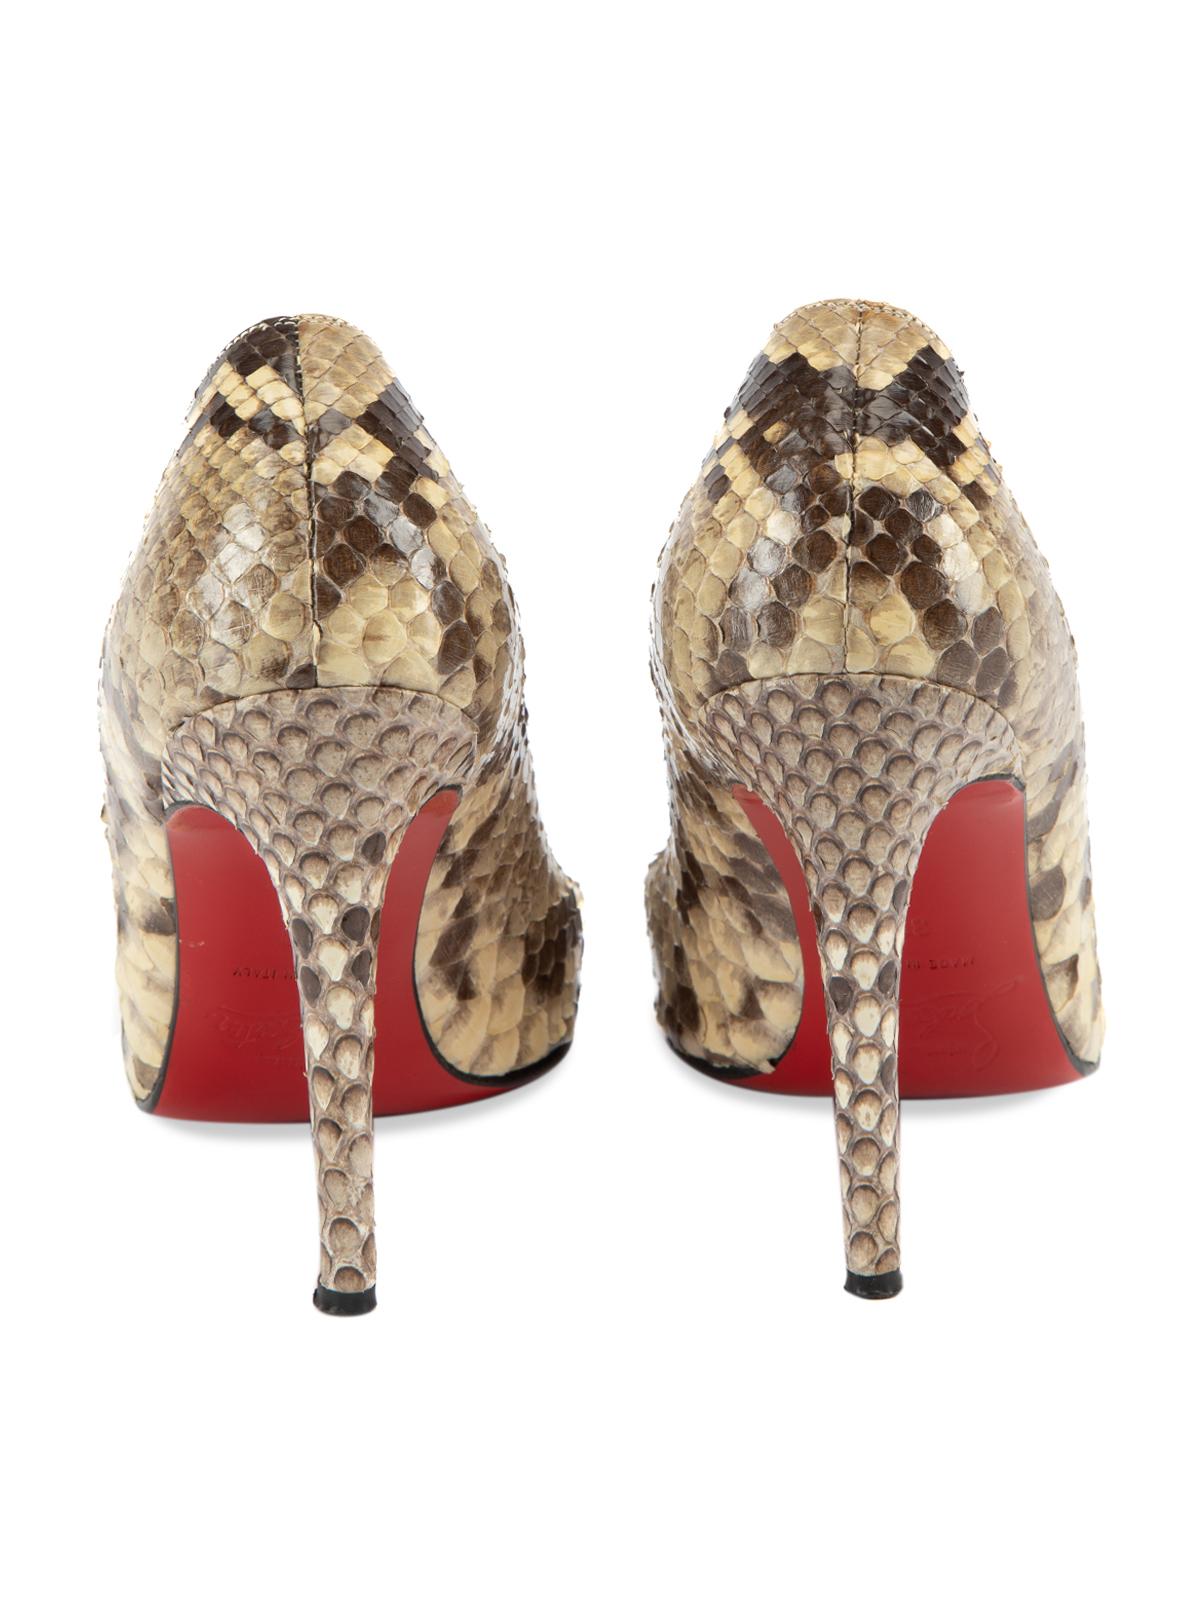 Pre-Loved Christian Louboutin Women's Snakeskin Closed Toe Pump Heels In Excellent Condition In London, GB